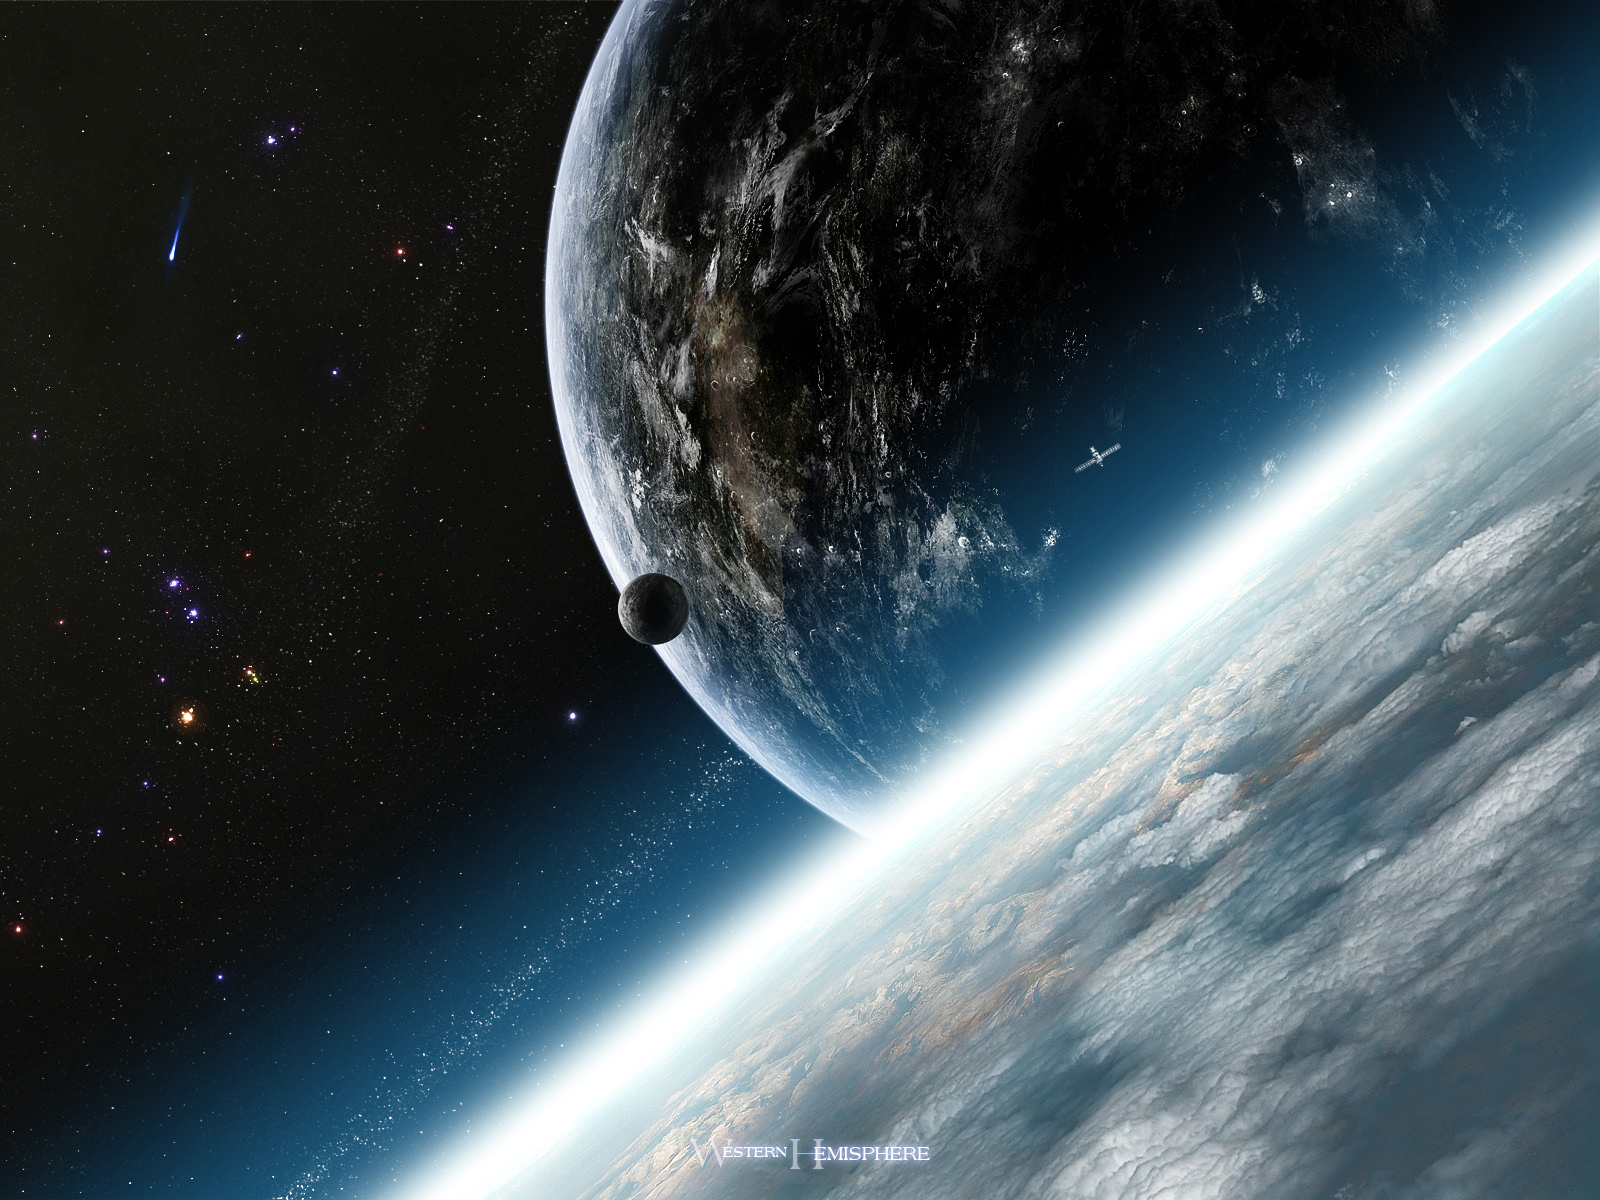 SpaceFantasy Wallpaper Set 1 171 Awesome Wallpapers